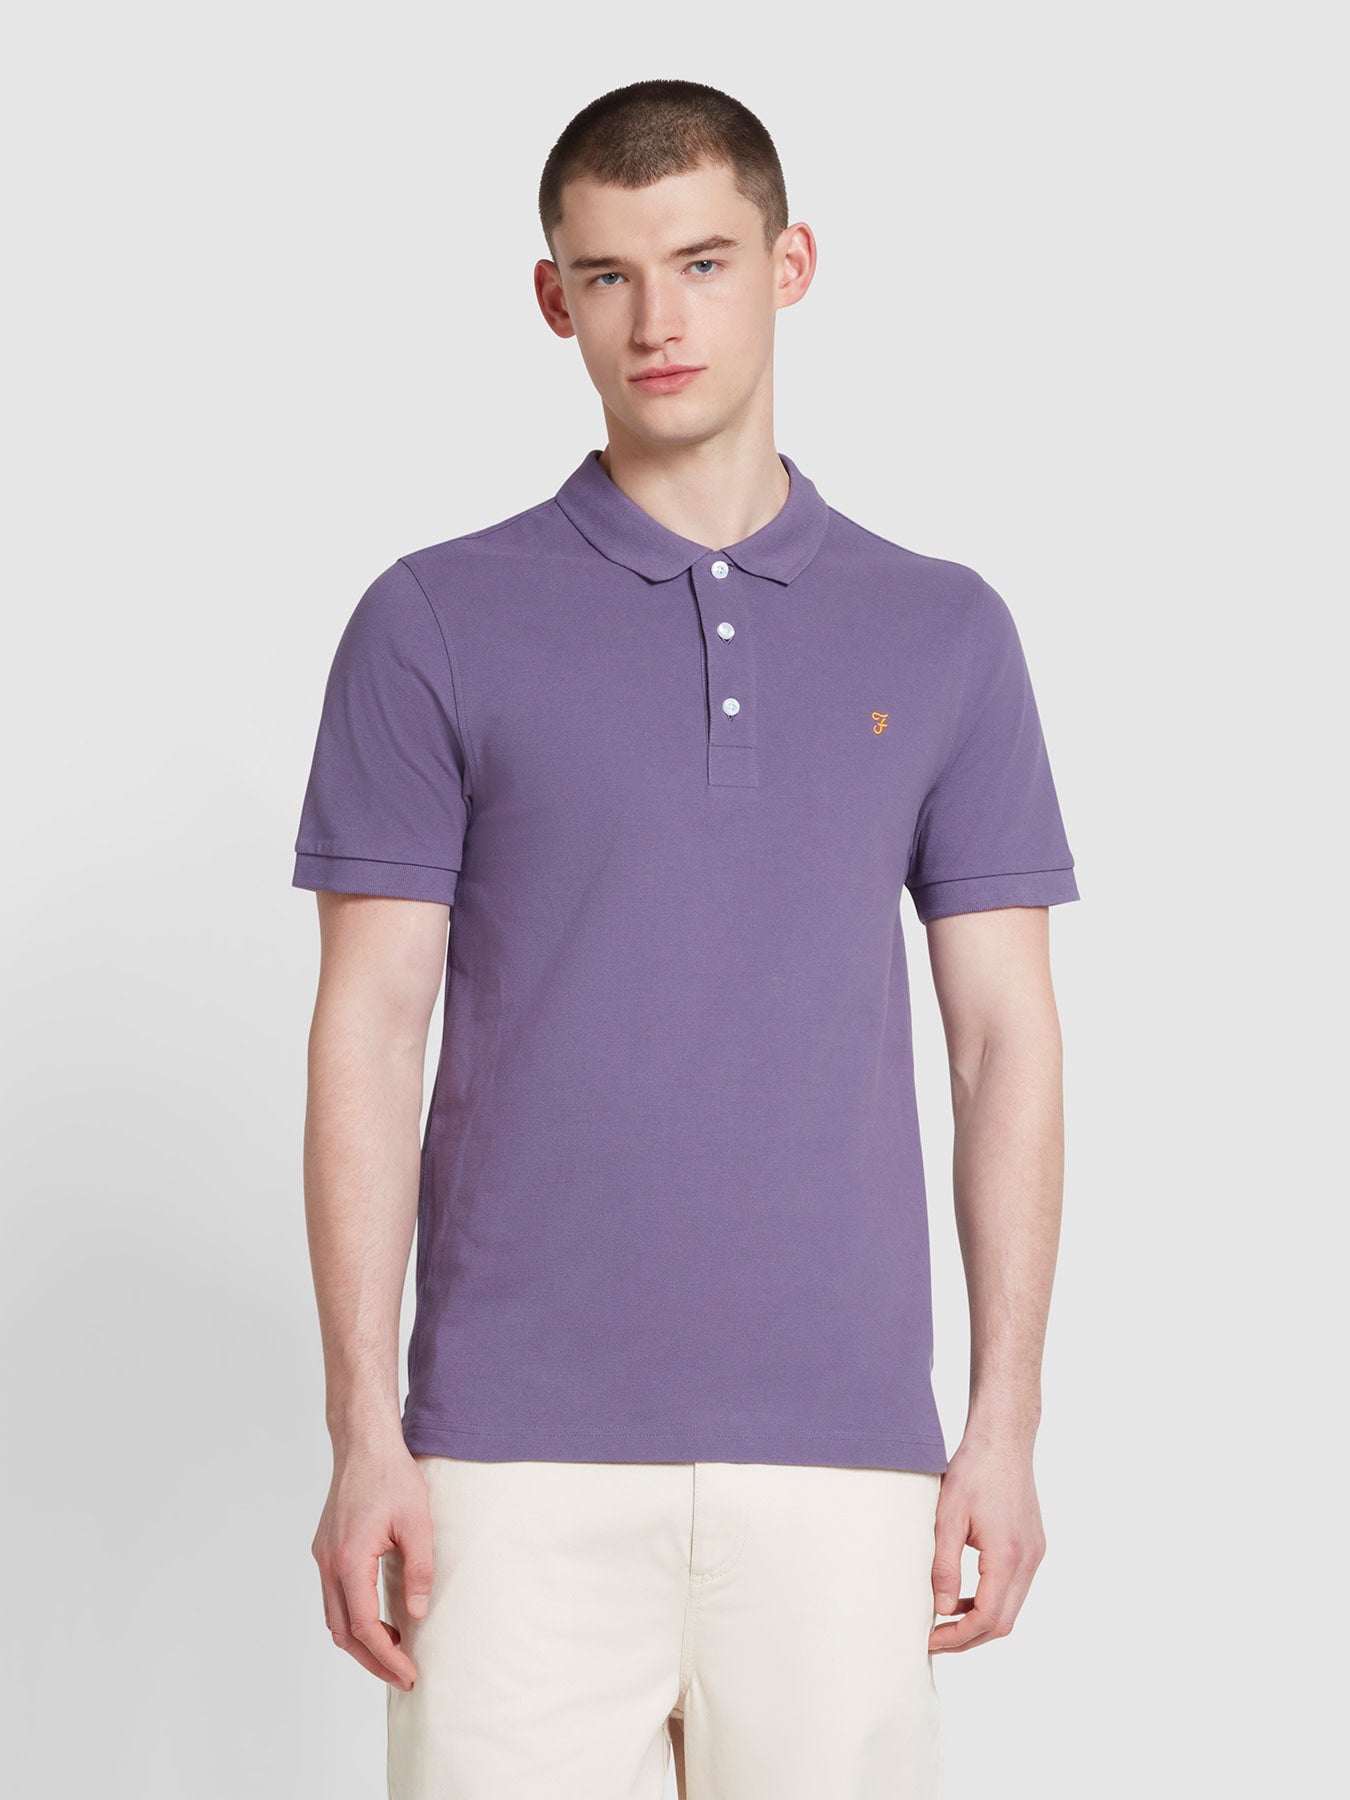 View Blanes Organic Cotton Short Sleeve Polo Shirt In Slate Purple information